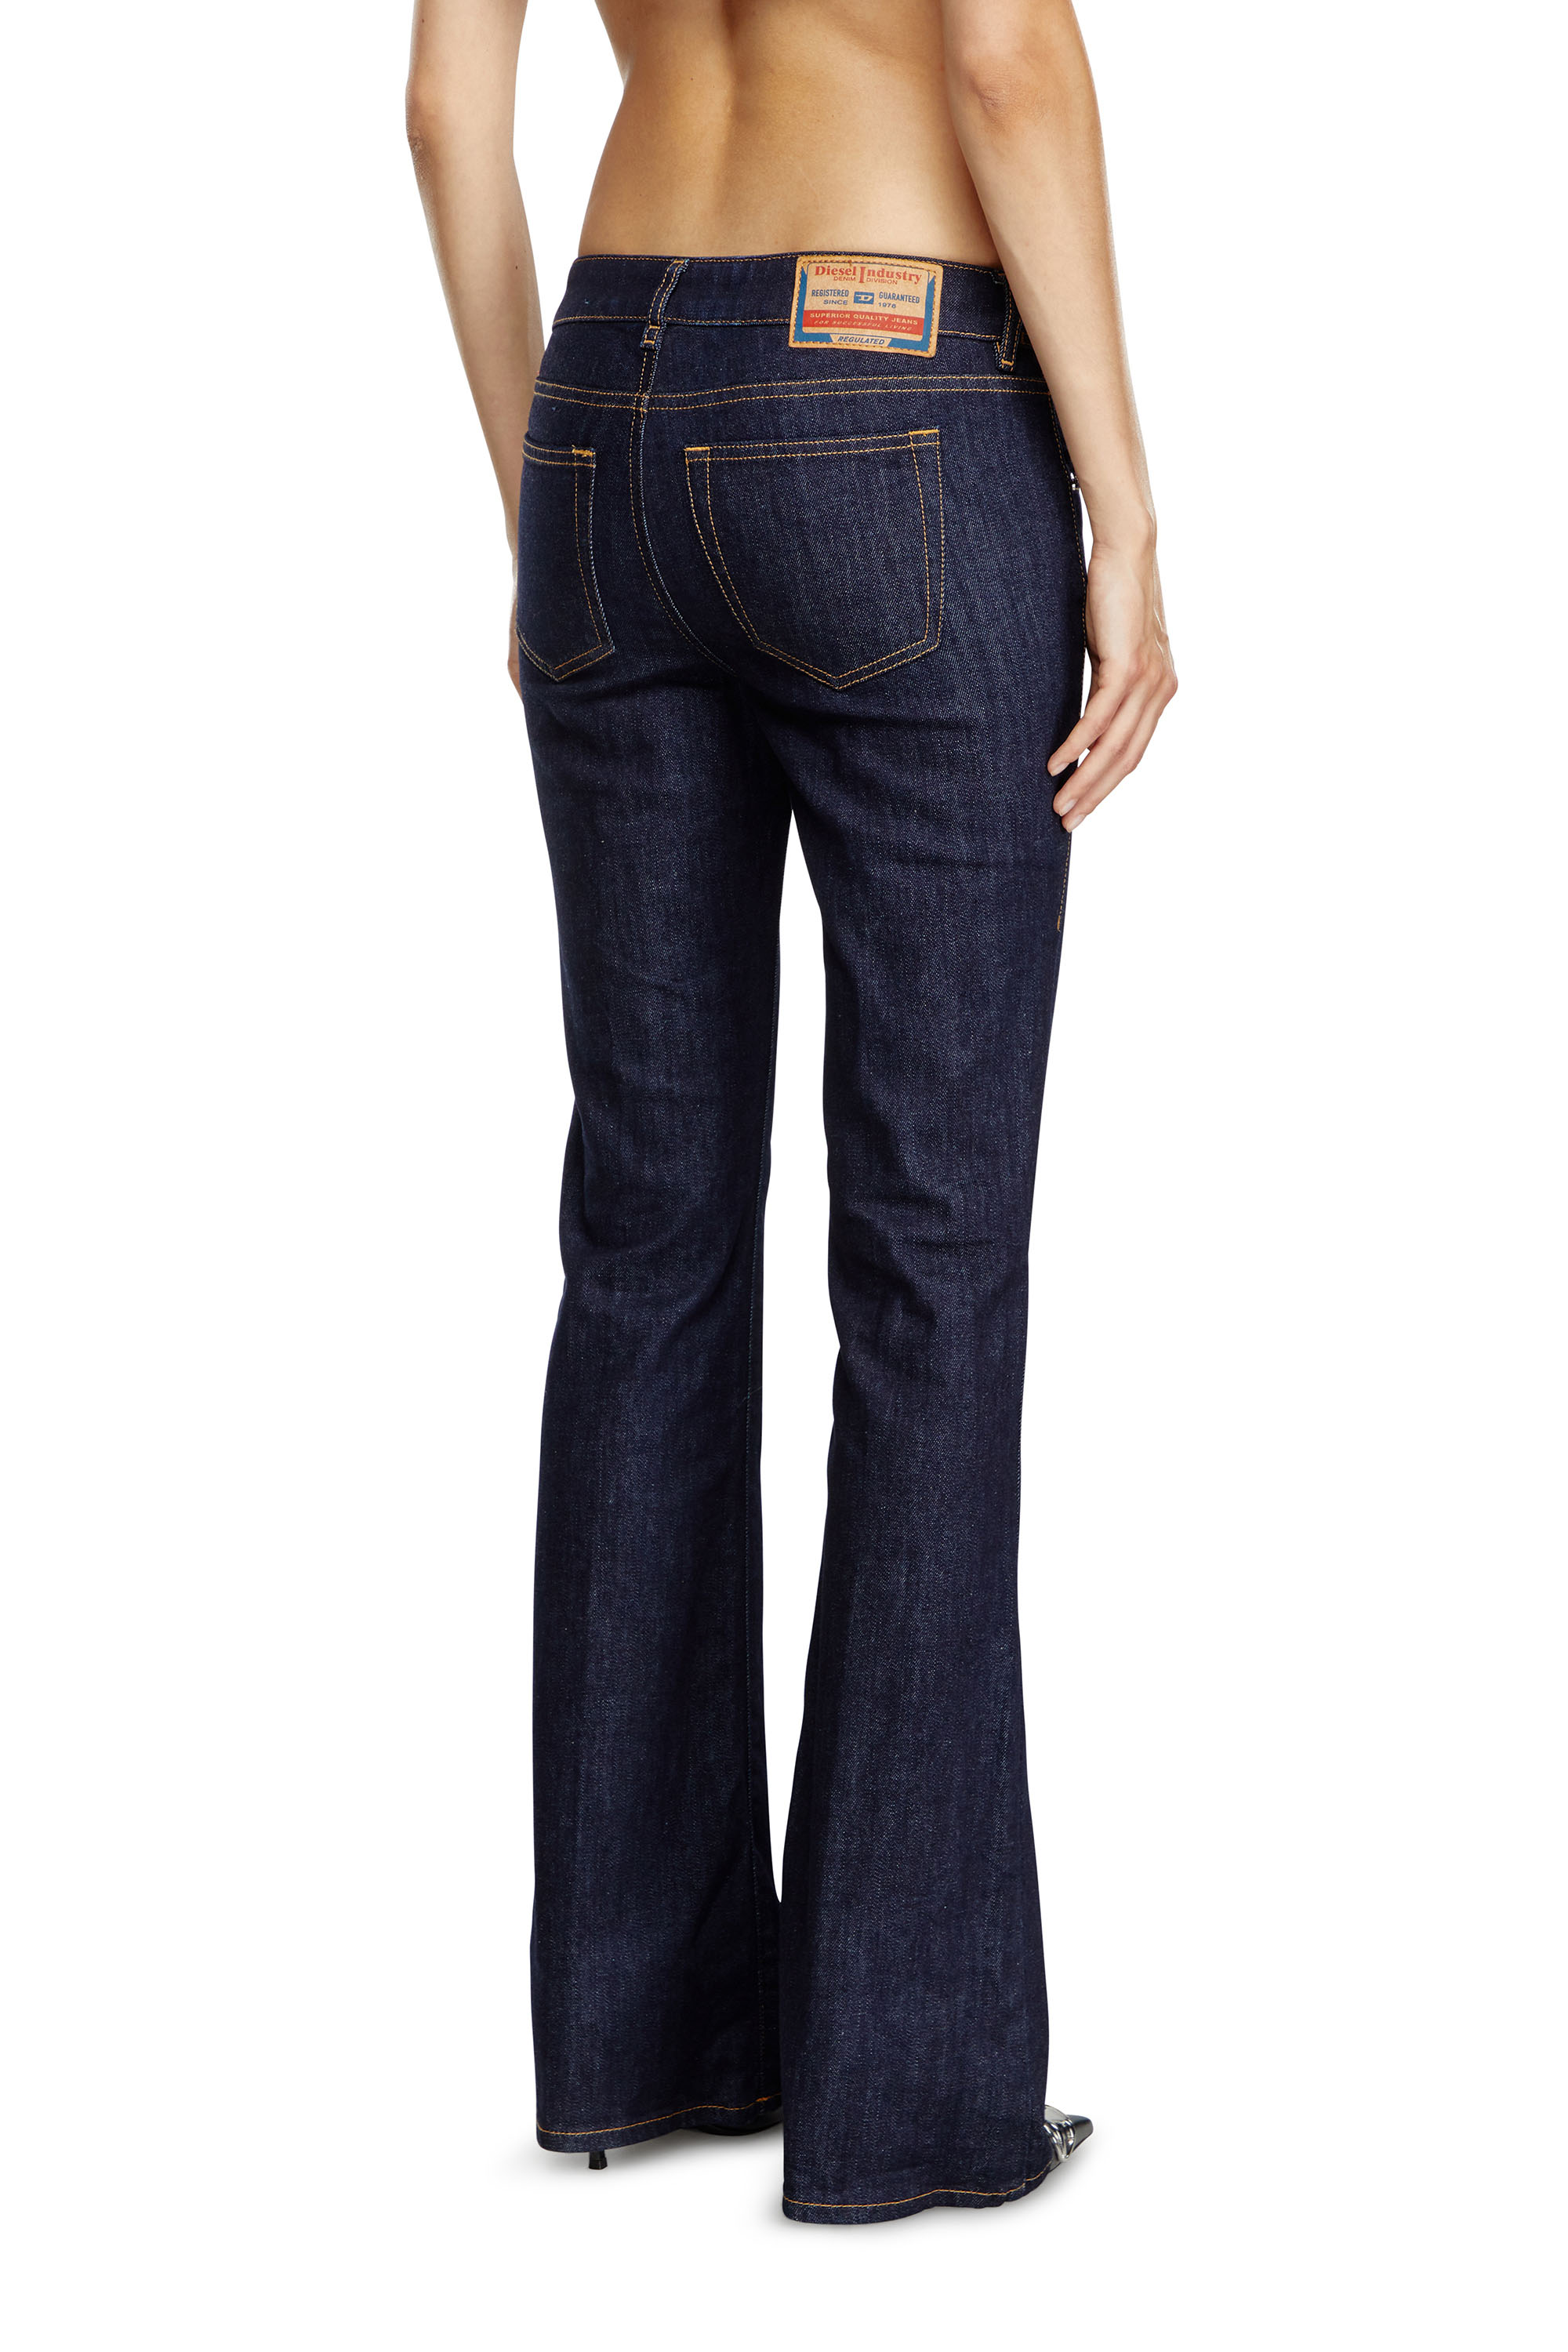 Diesel - Bootcut and Flare Jeans 1969 D-Ebbey Z9B89, Mujer Bootcut y Flare Jeans - 1969 D-Ebbey in Azul marino - Image 1